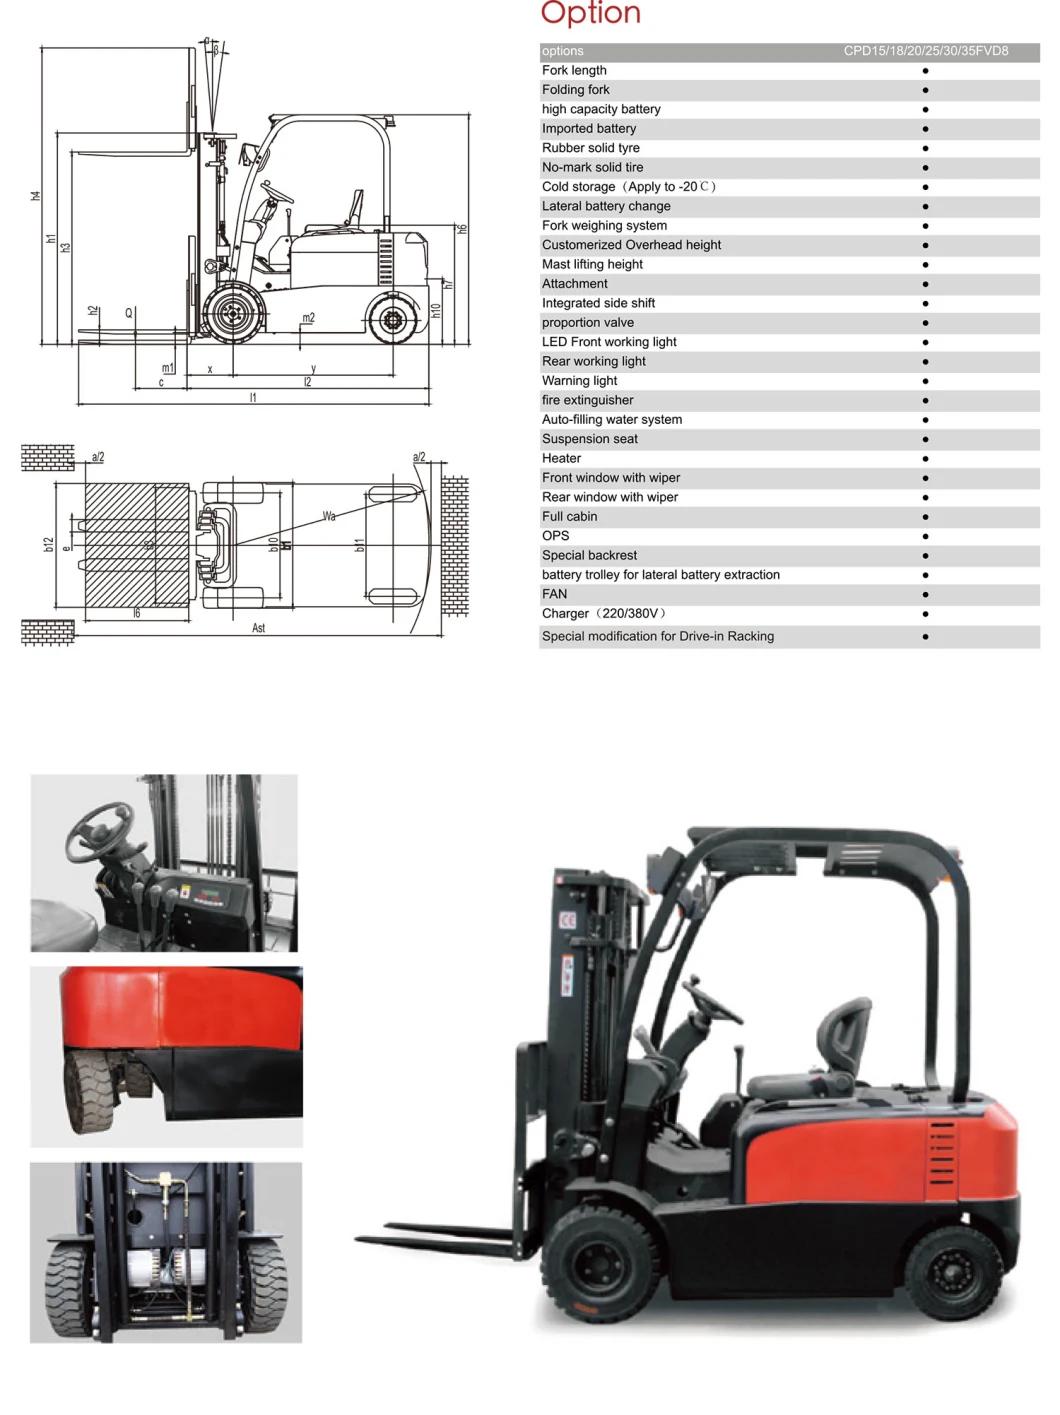 Ep 2 Ton Excellent Performance Dual Traction Four-Wheel Electric Forklift (CPD20FVD8)